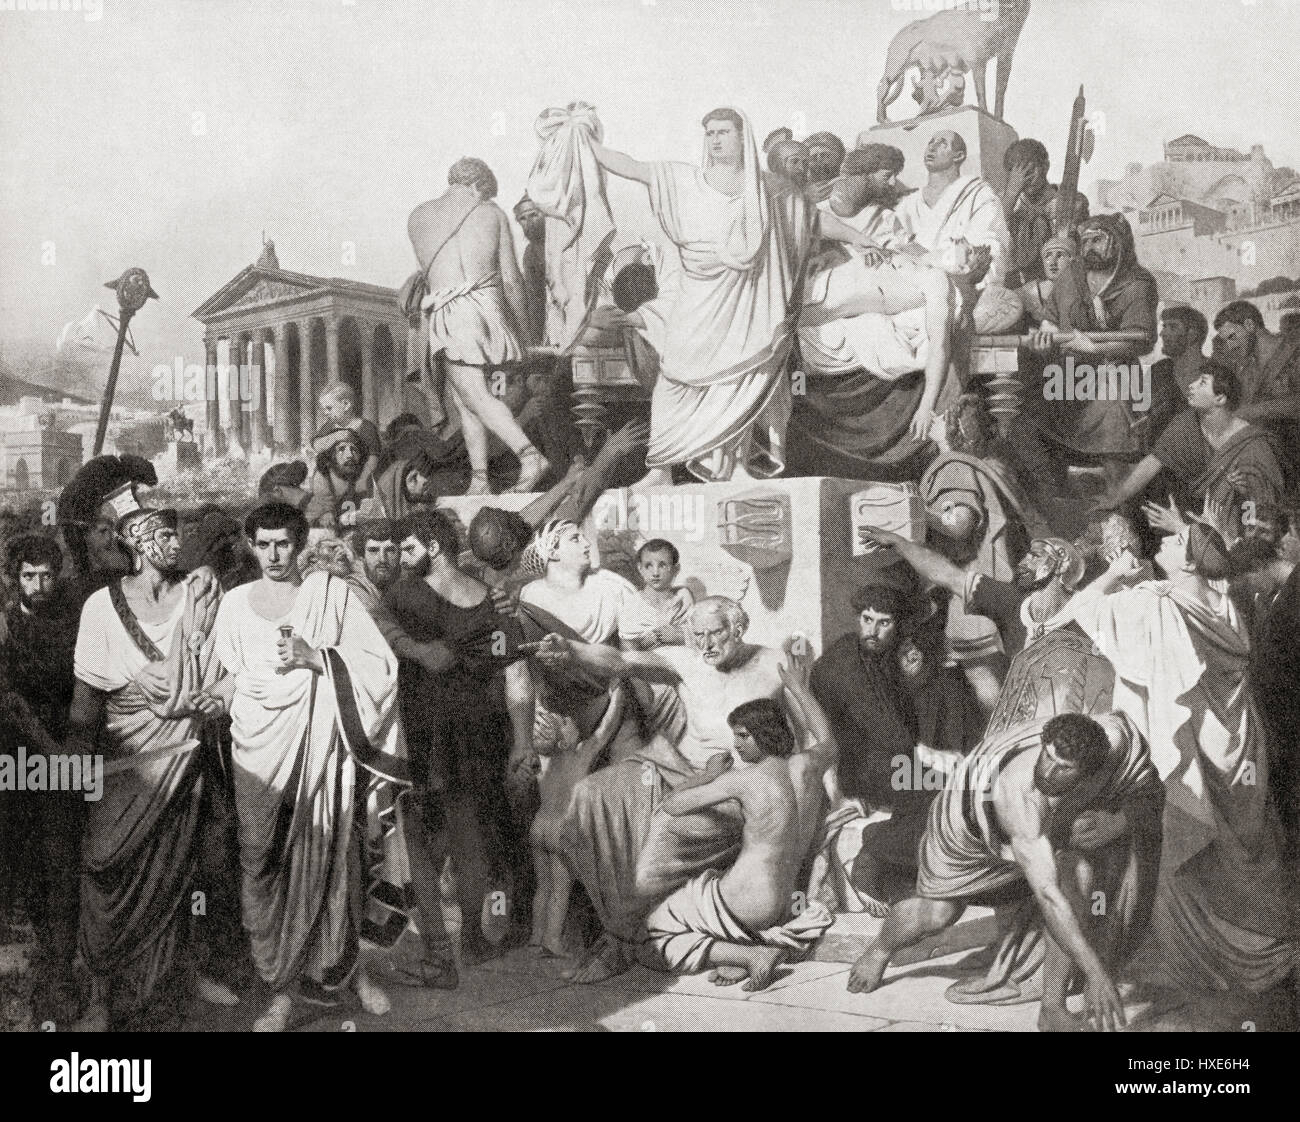 Mark Antony delivering the funeral oration over the dead body of Caesar, 44BC.  Marcus Antonius, 83 BC – 30 BC, aka Mark or Marc Antony. Roman politician and general.  From Hutchinson's History of the Nations, published 1915. Stock Photo